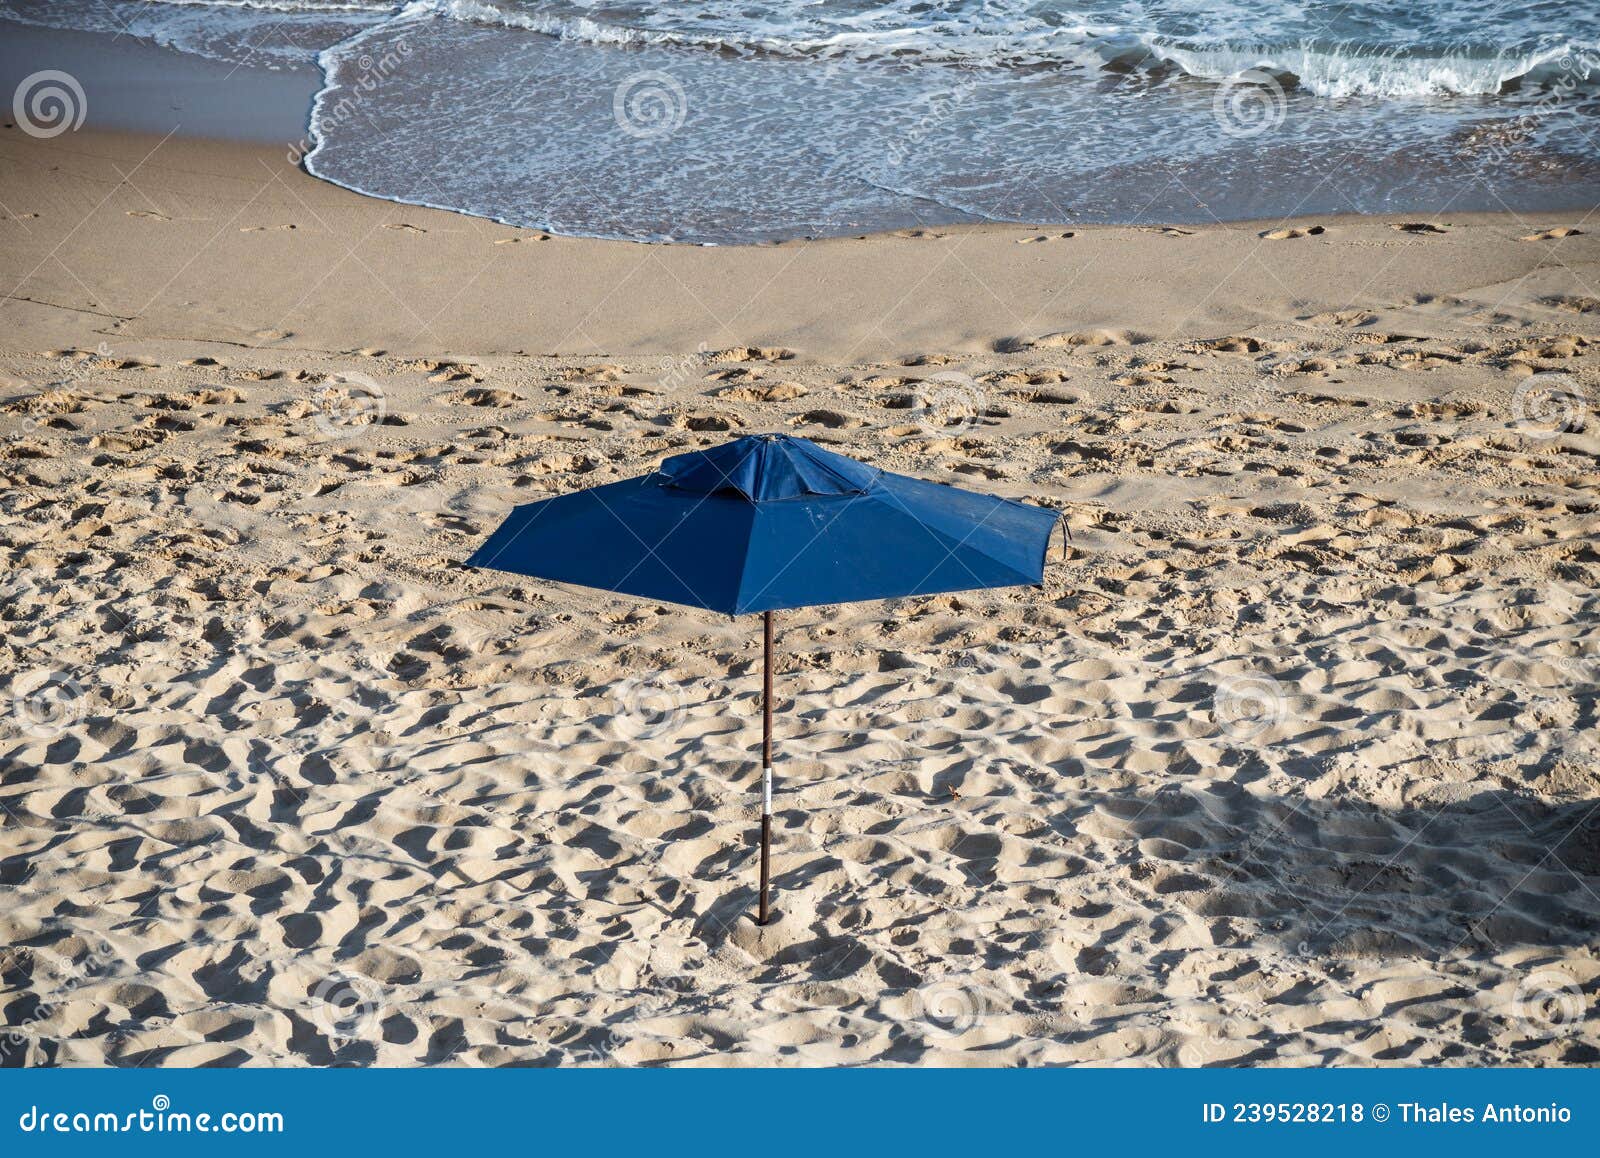 sunshade on the beach in the strong sun of the day